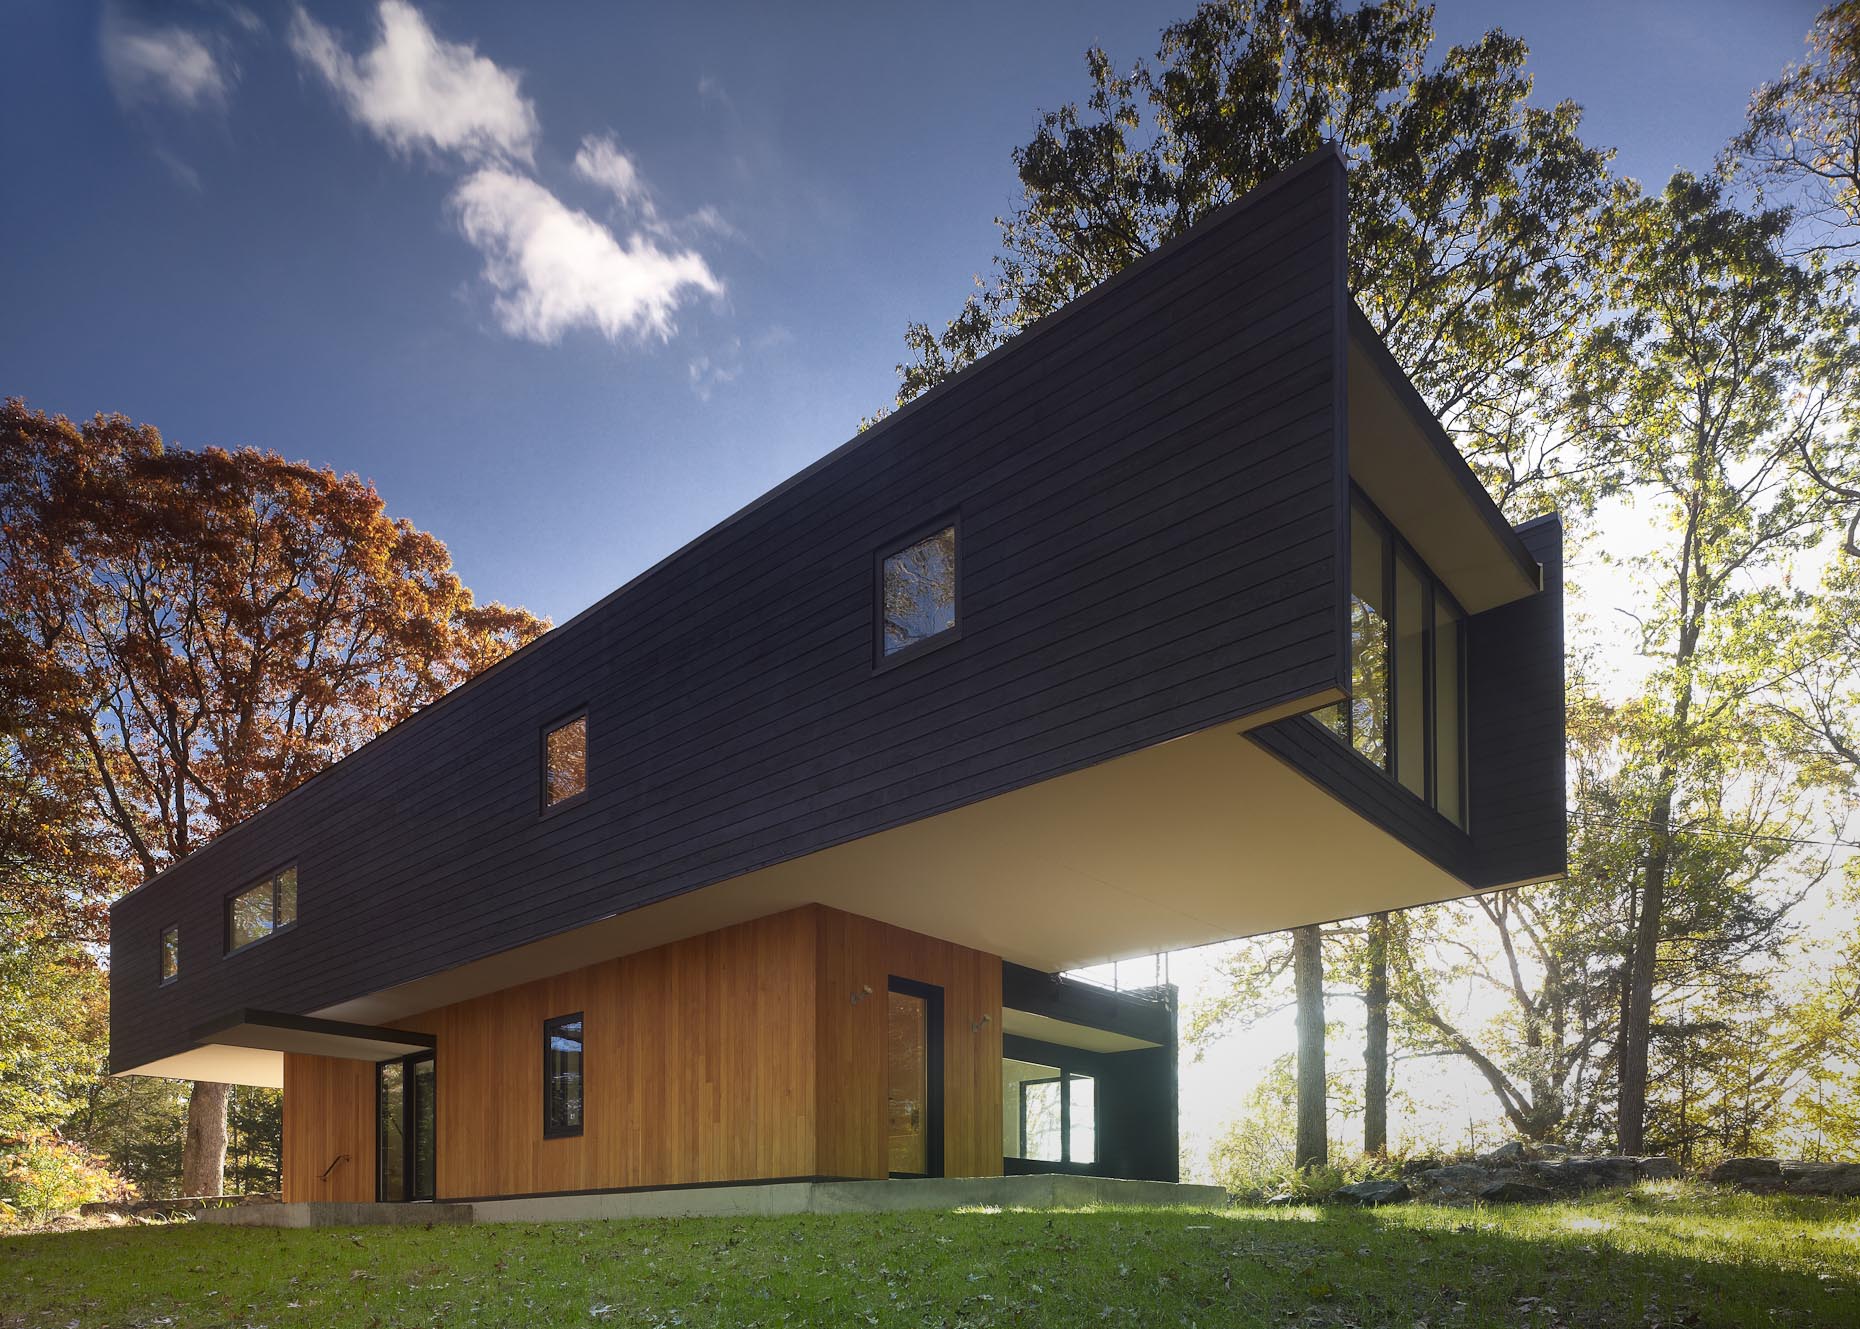 Waccabuc Private Residence by Chan-Li Lin & Denise Ferris photographed by Brad Feinknopf based in COlumbus, Ohio